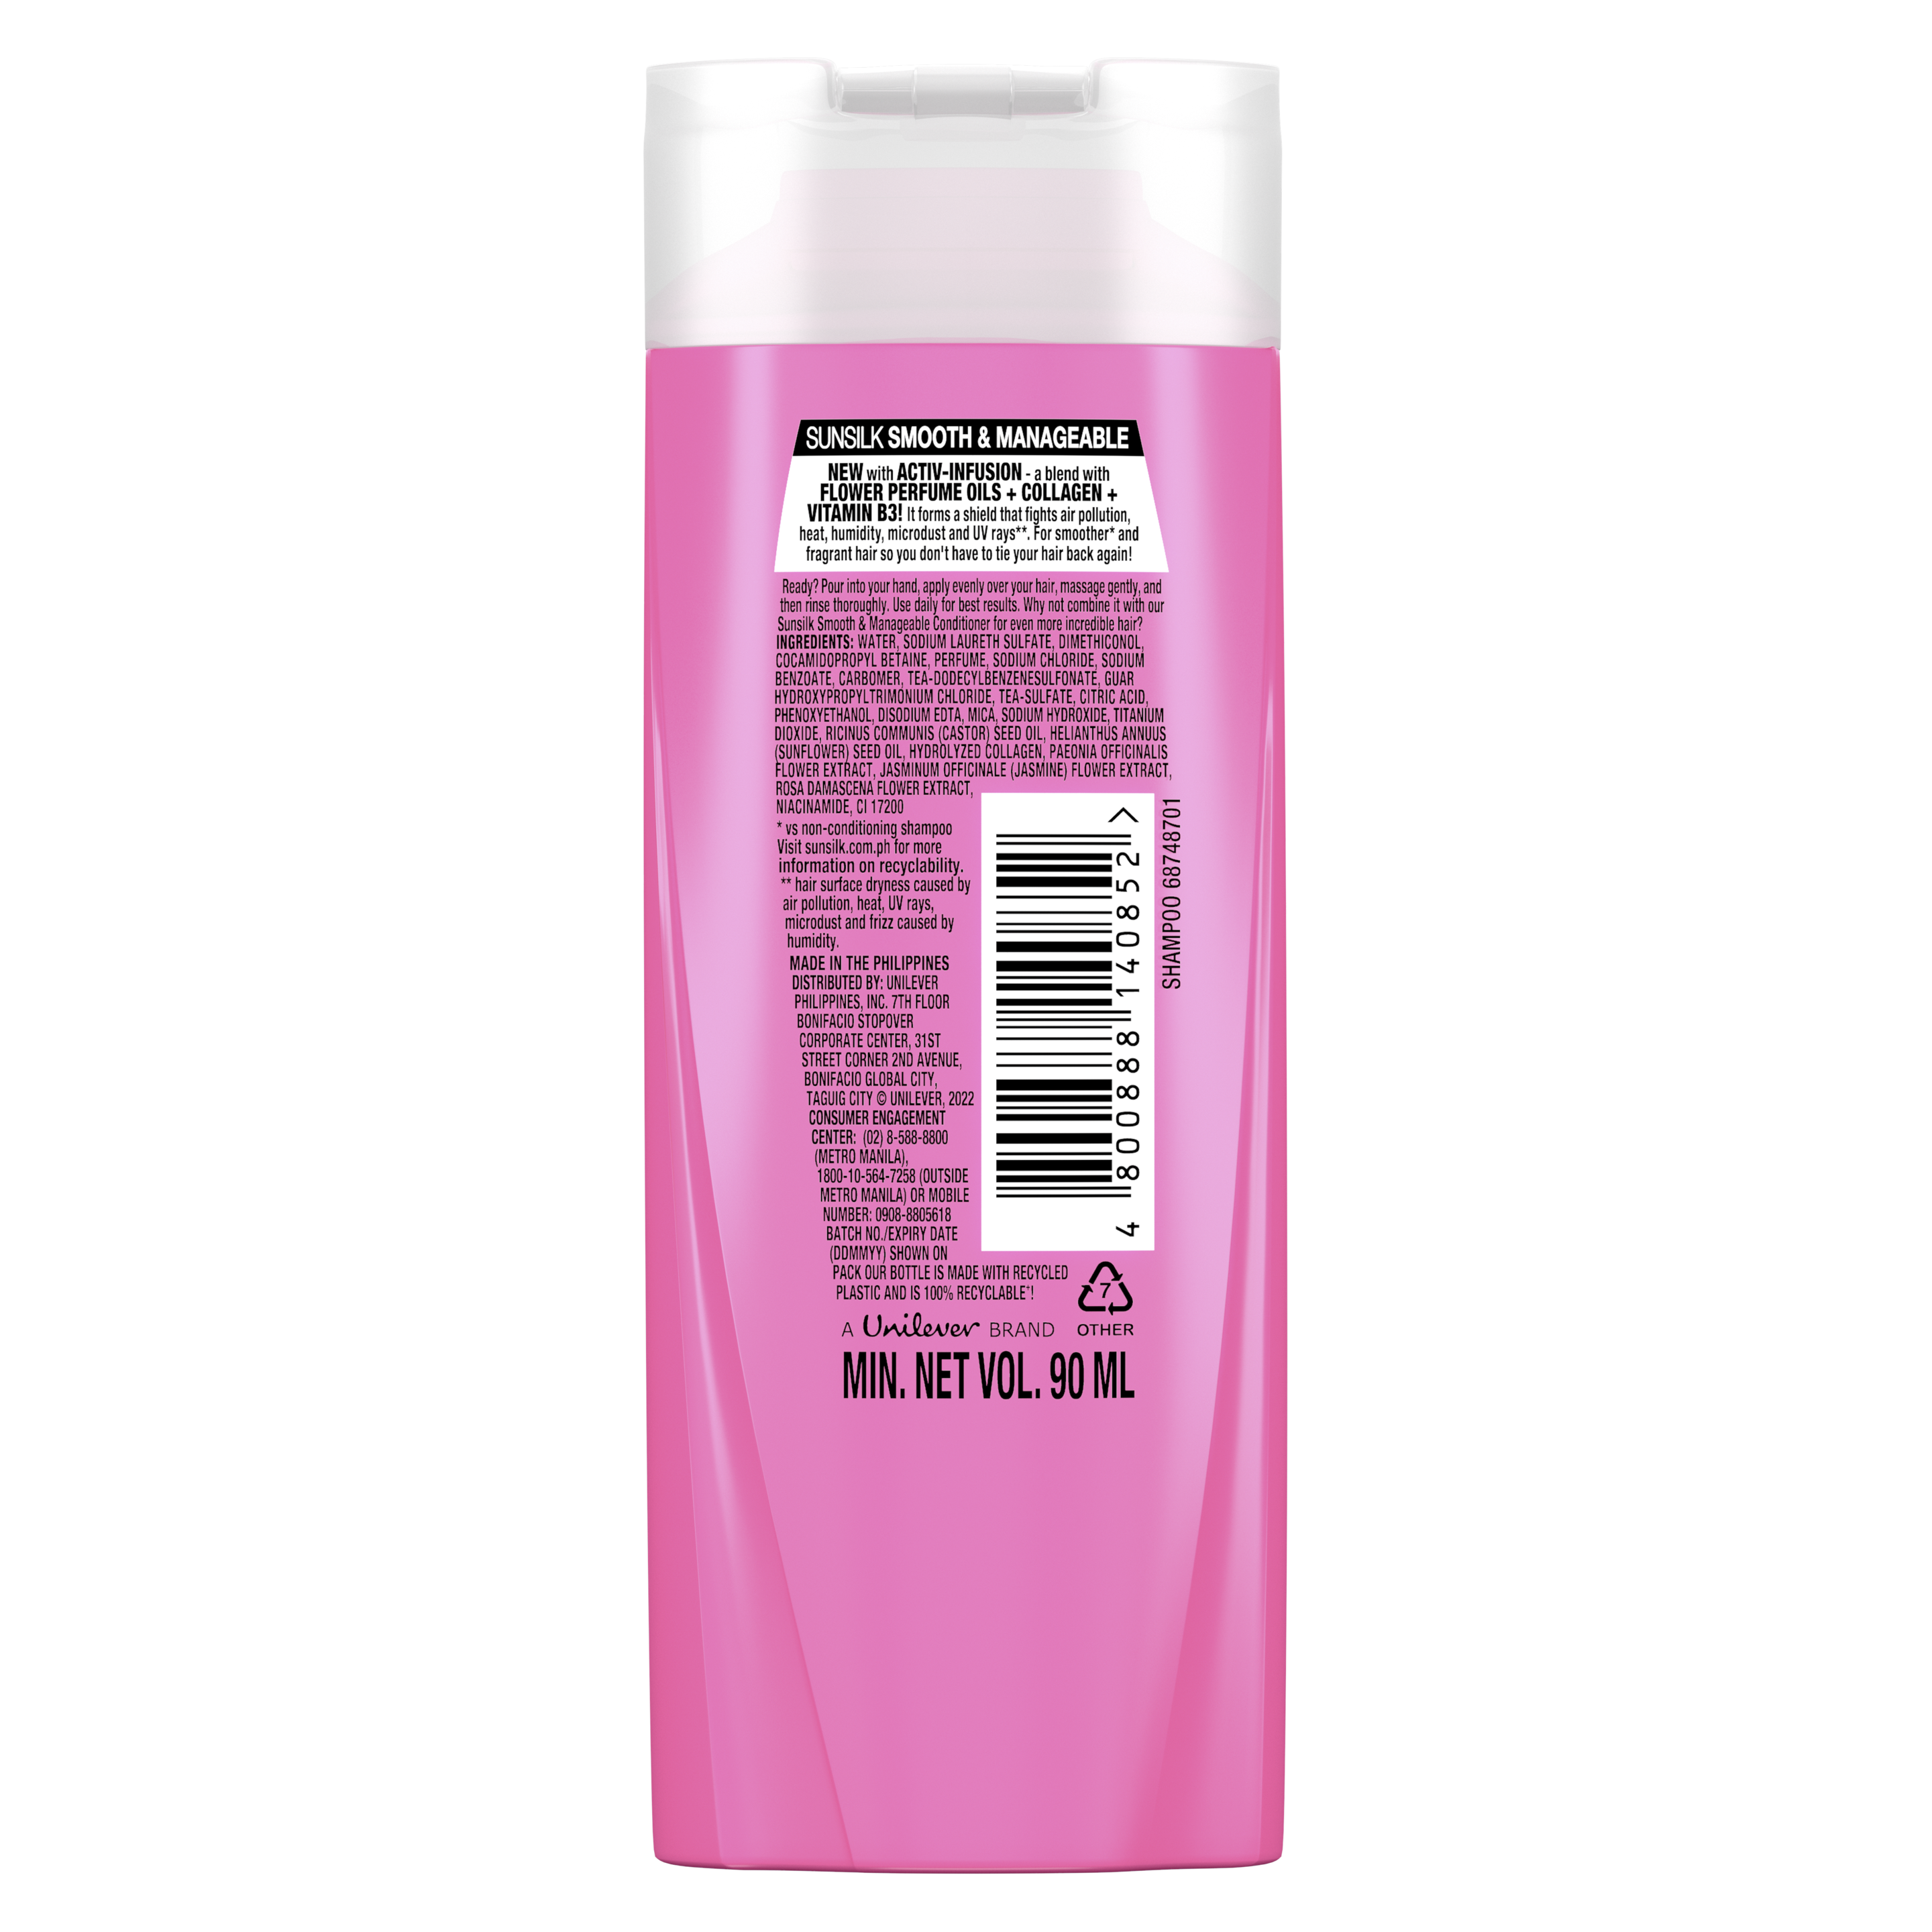 NEW Sunsilk Pink Smooth & Manageable 180ML